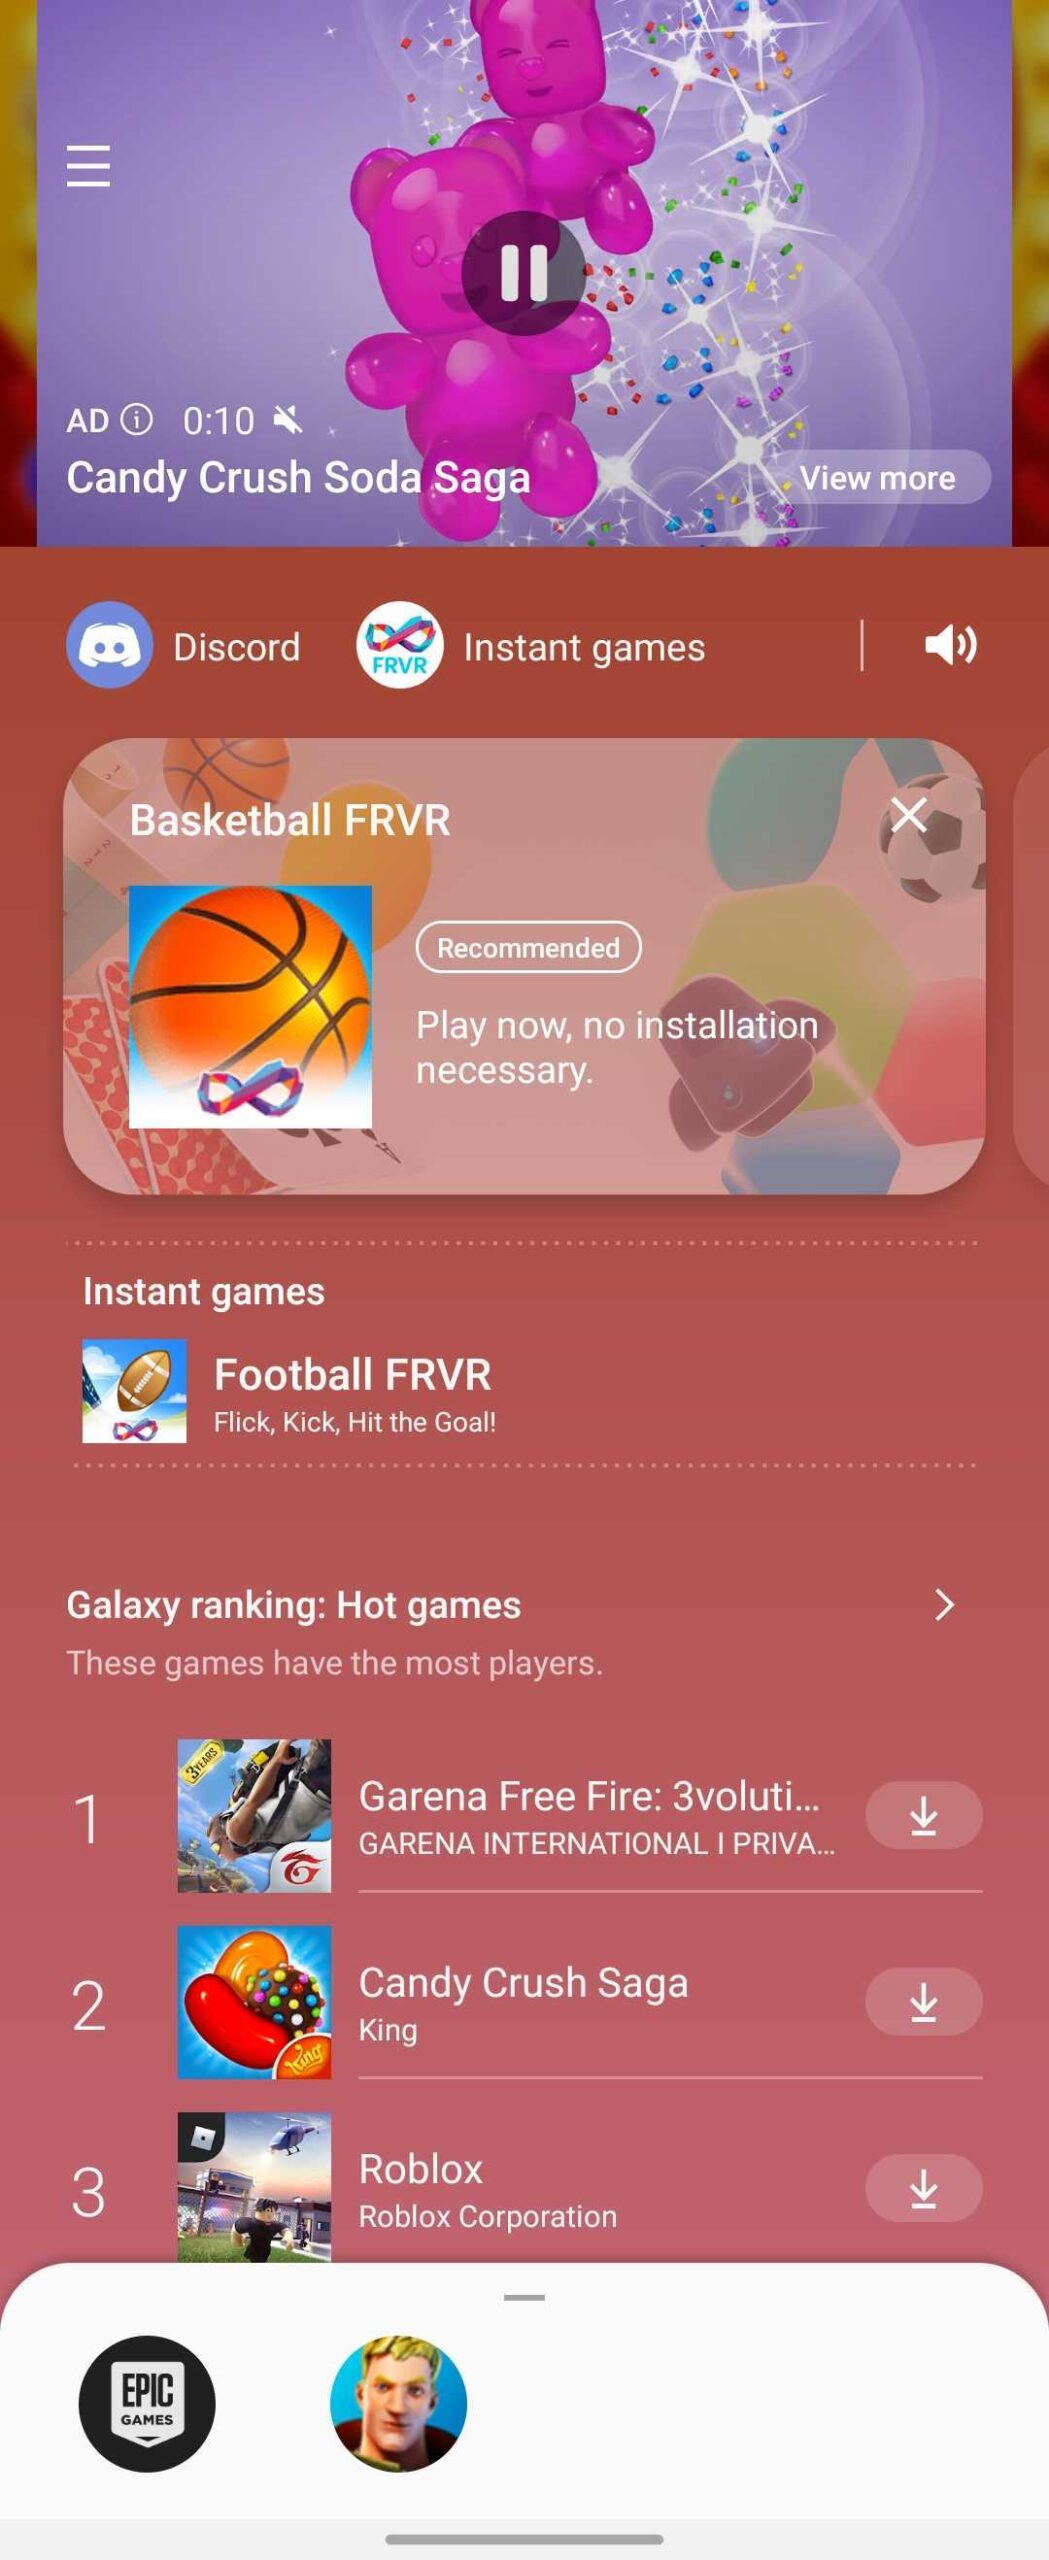 Samsung Game Launcher is updated with a couple of new features